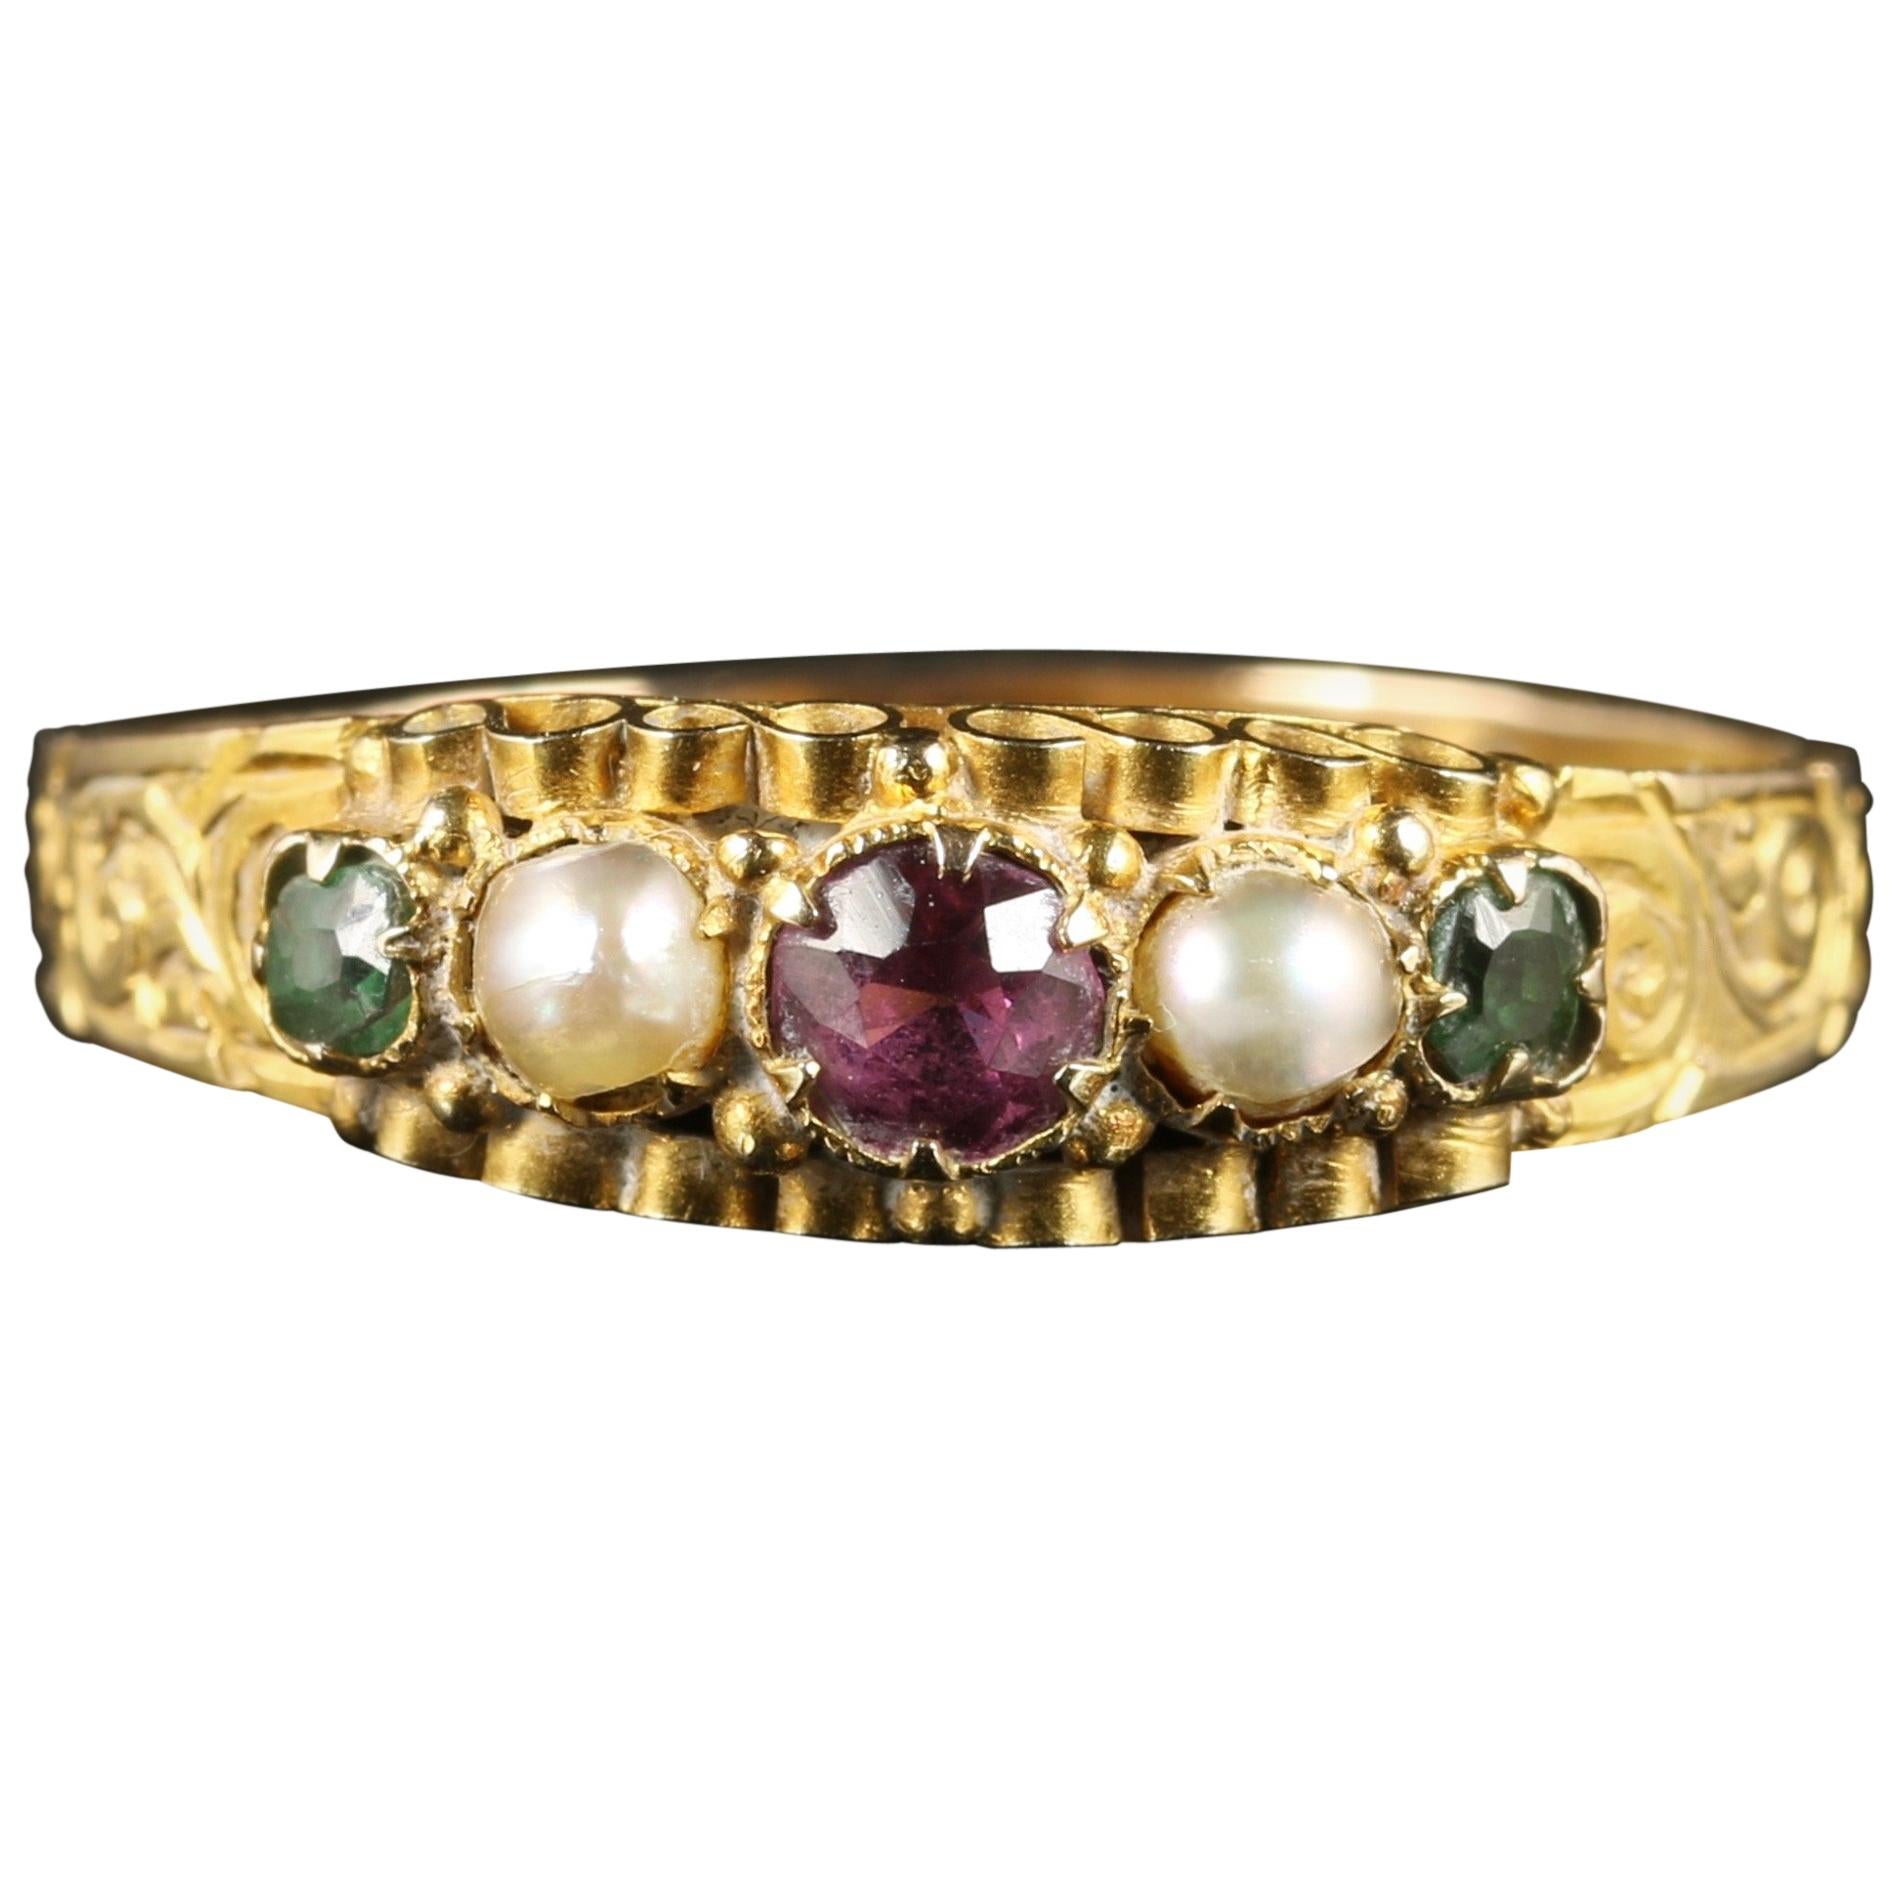 Antique Victorian Amethyst Emerald Pearl Ring Dated 1867 12 Carat Gold